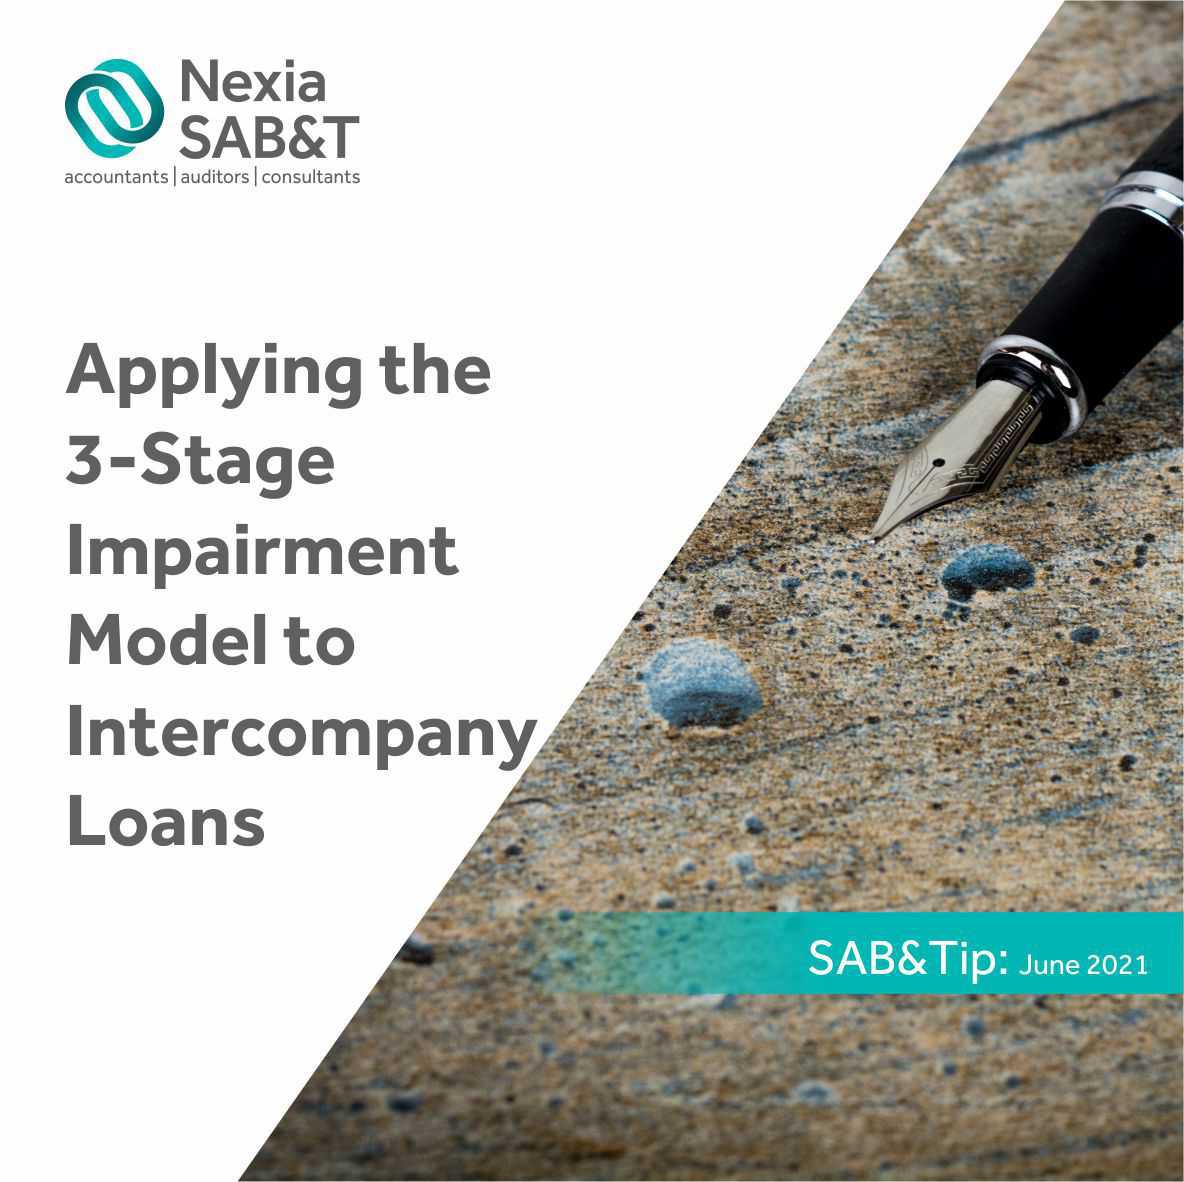 Applying the 3-Stage Impairment Model to Intercompany Loans